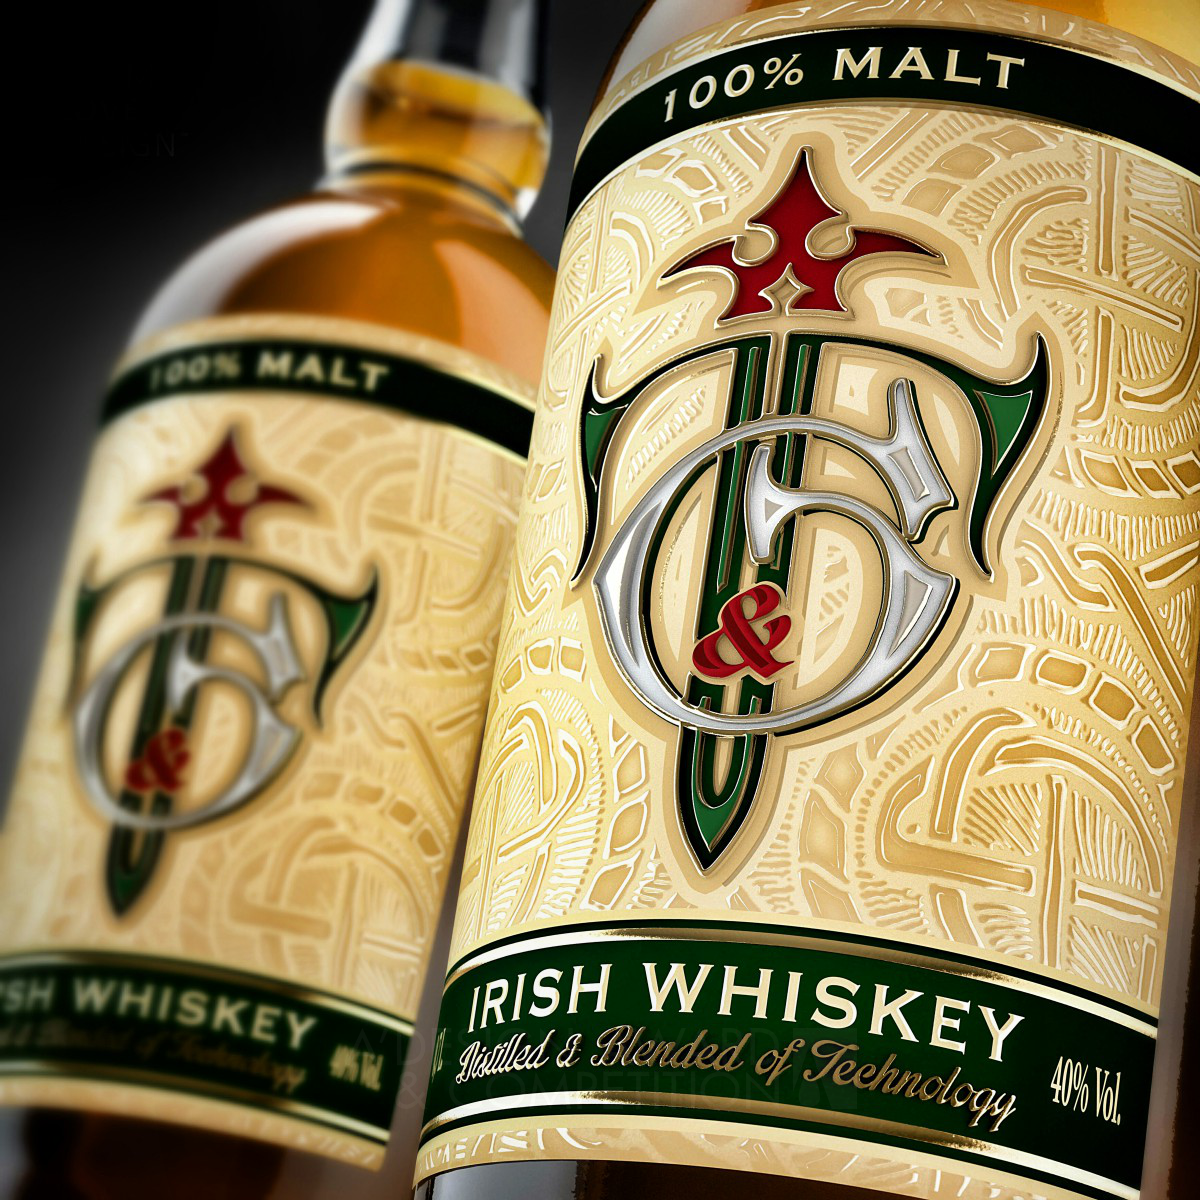 T and G Whiskey Packaging Design by Valerii Sumilov